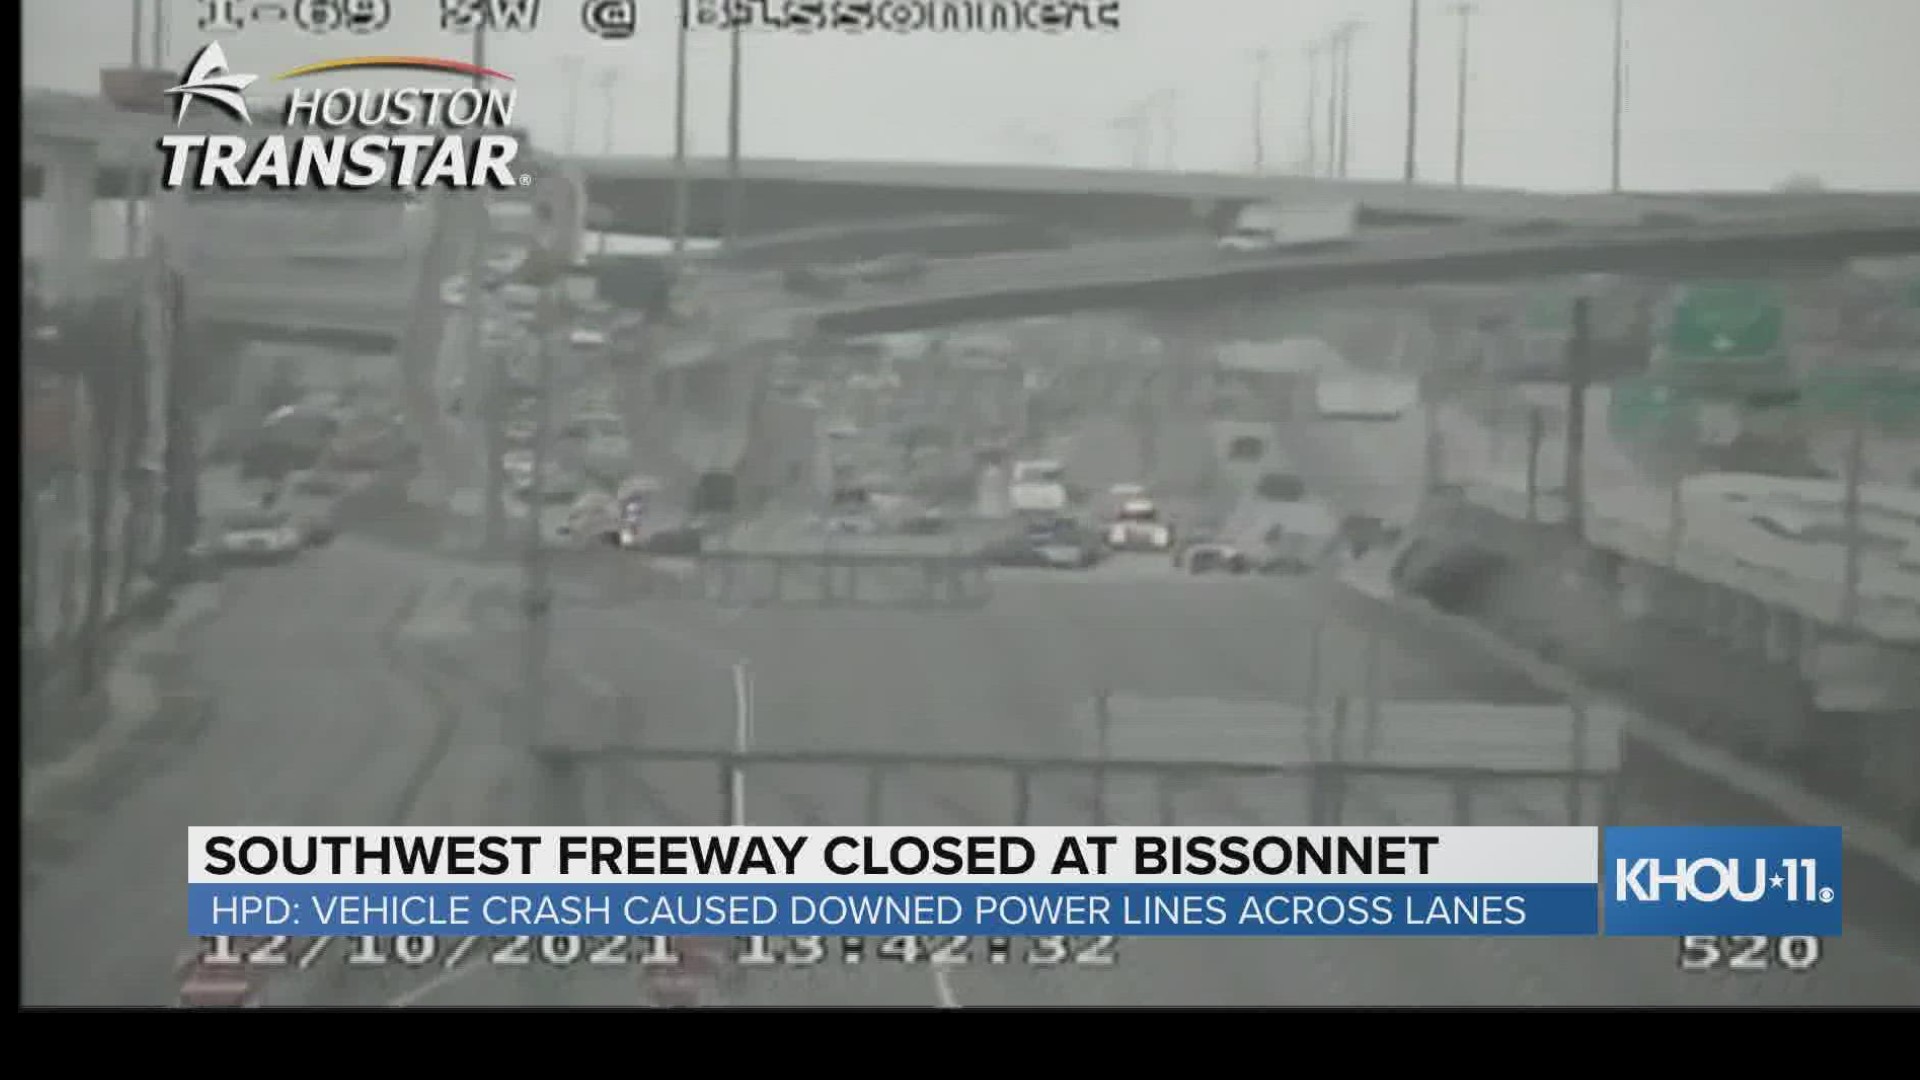 Houston police say downed power lines led to the Southwest Freeway being shut down in both directions Friday at Bissnonnet.